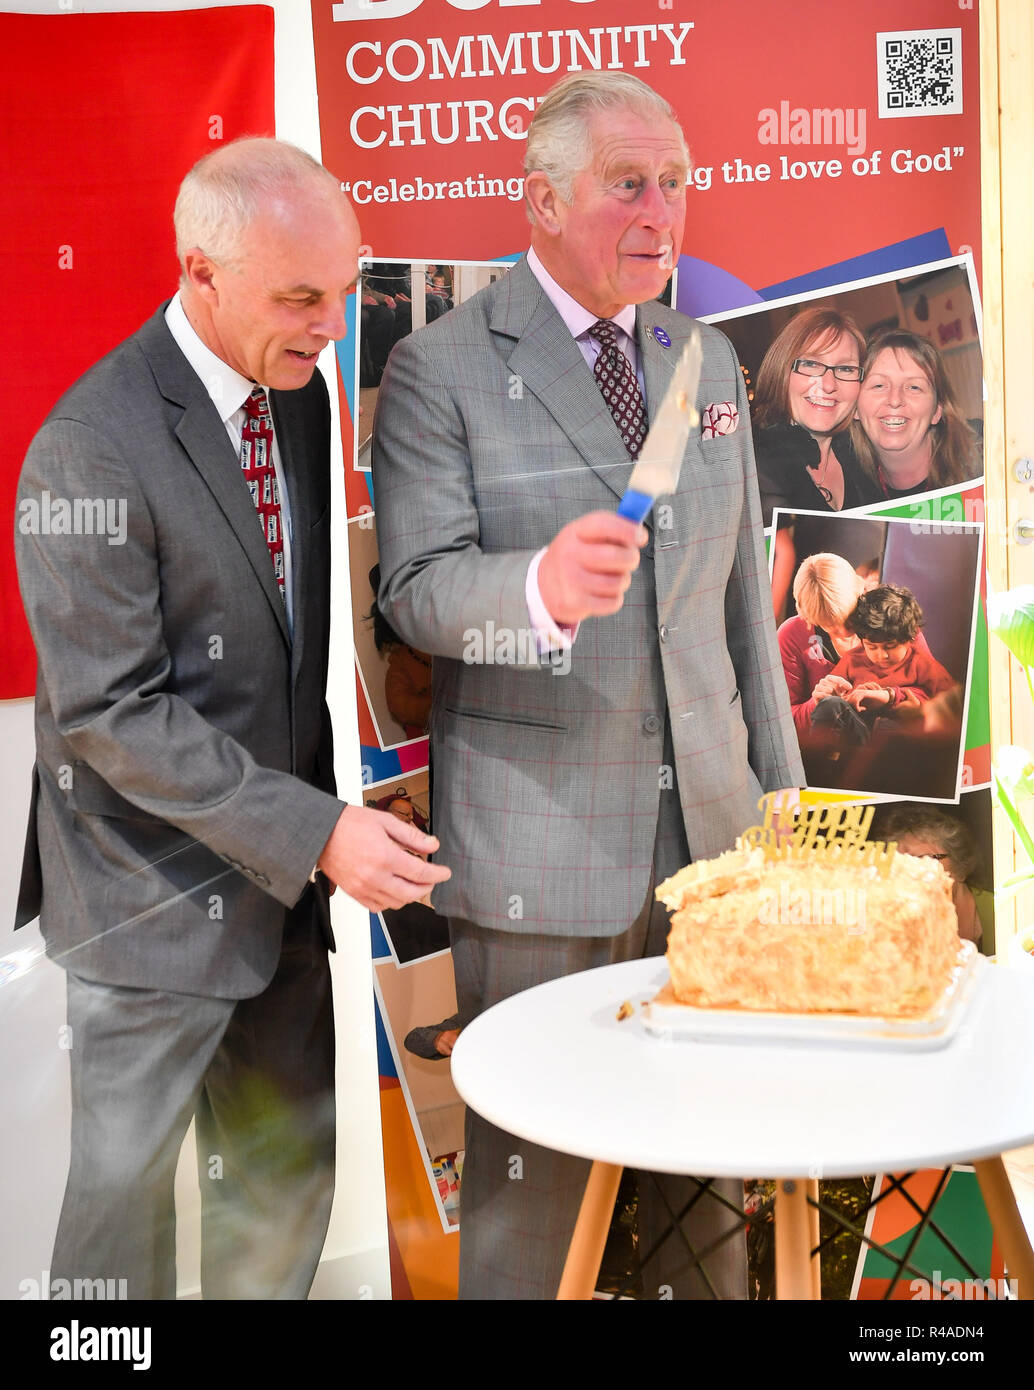 The Prince of Wales cuts a birthday cake with pastor Roger Frapwell in Dorchester Community Church, Poundbury, Dorset, where the Prince is opening the church and Yarlington Housing Group's new Extra Care housing development. Stock Photo